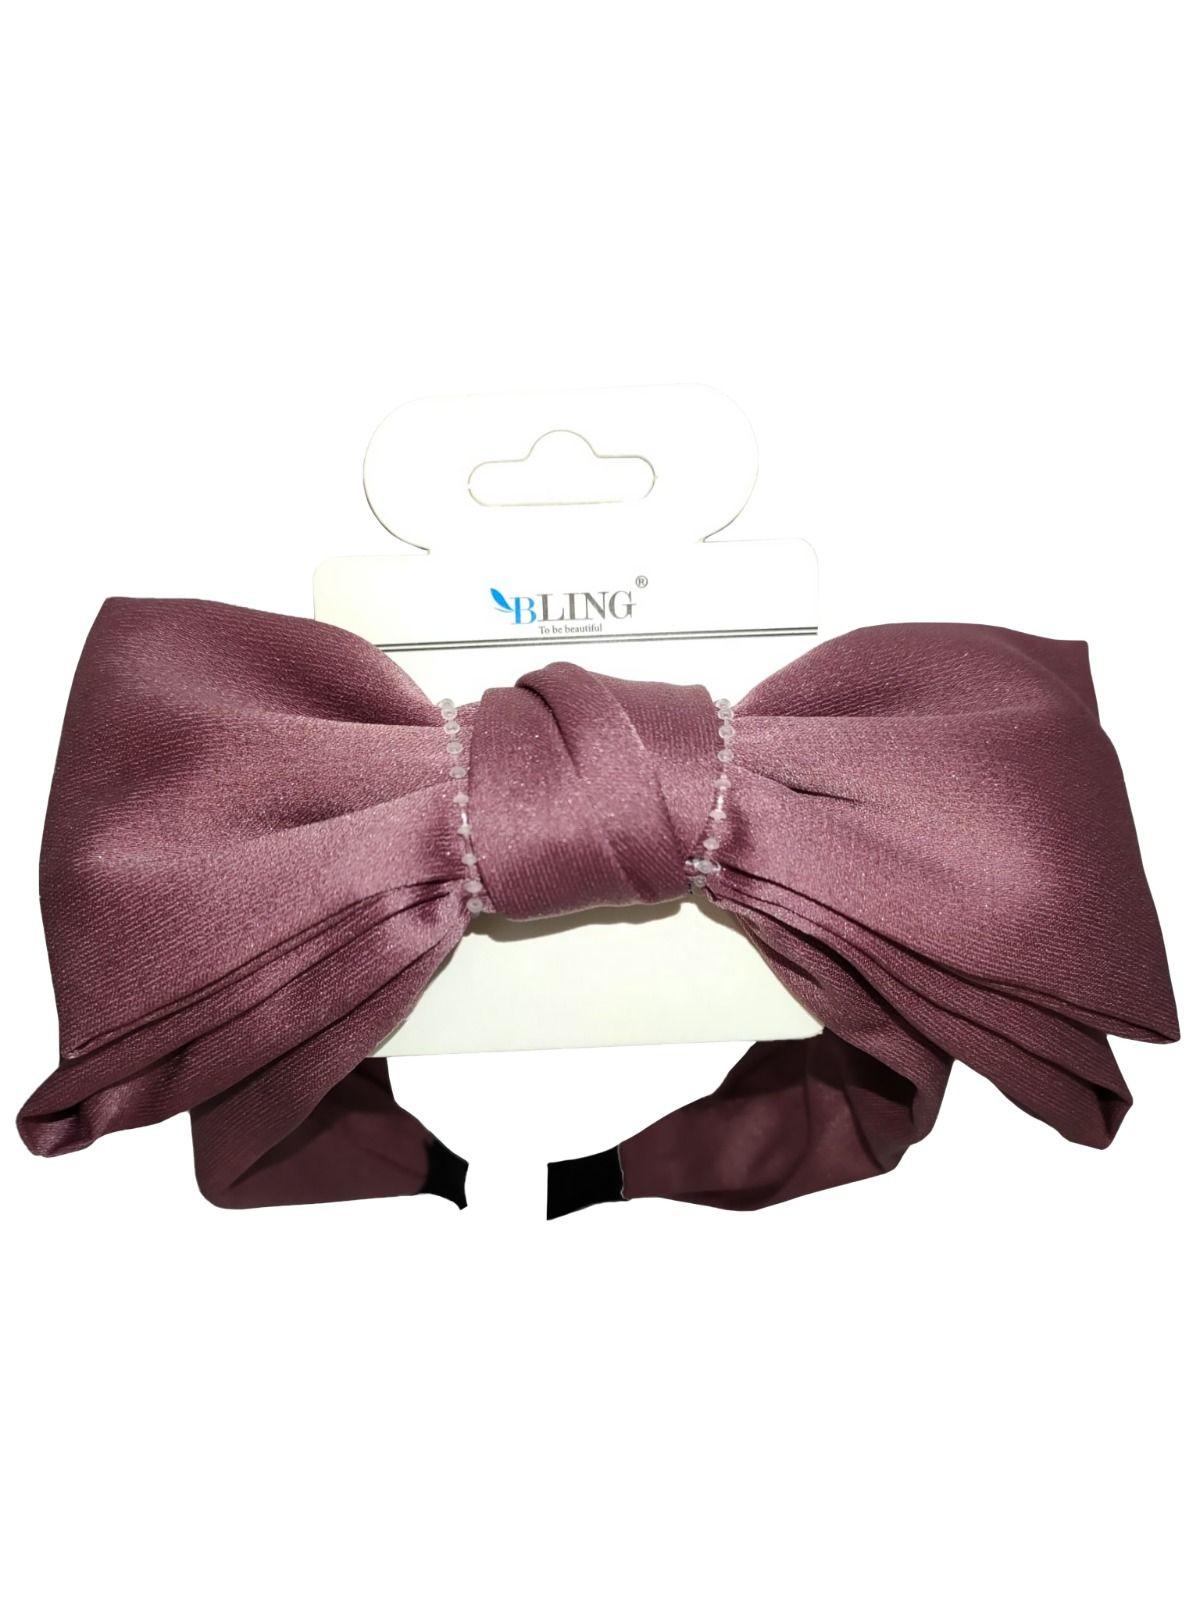 Hair band with a decorative large double BLING bow - purple